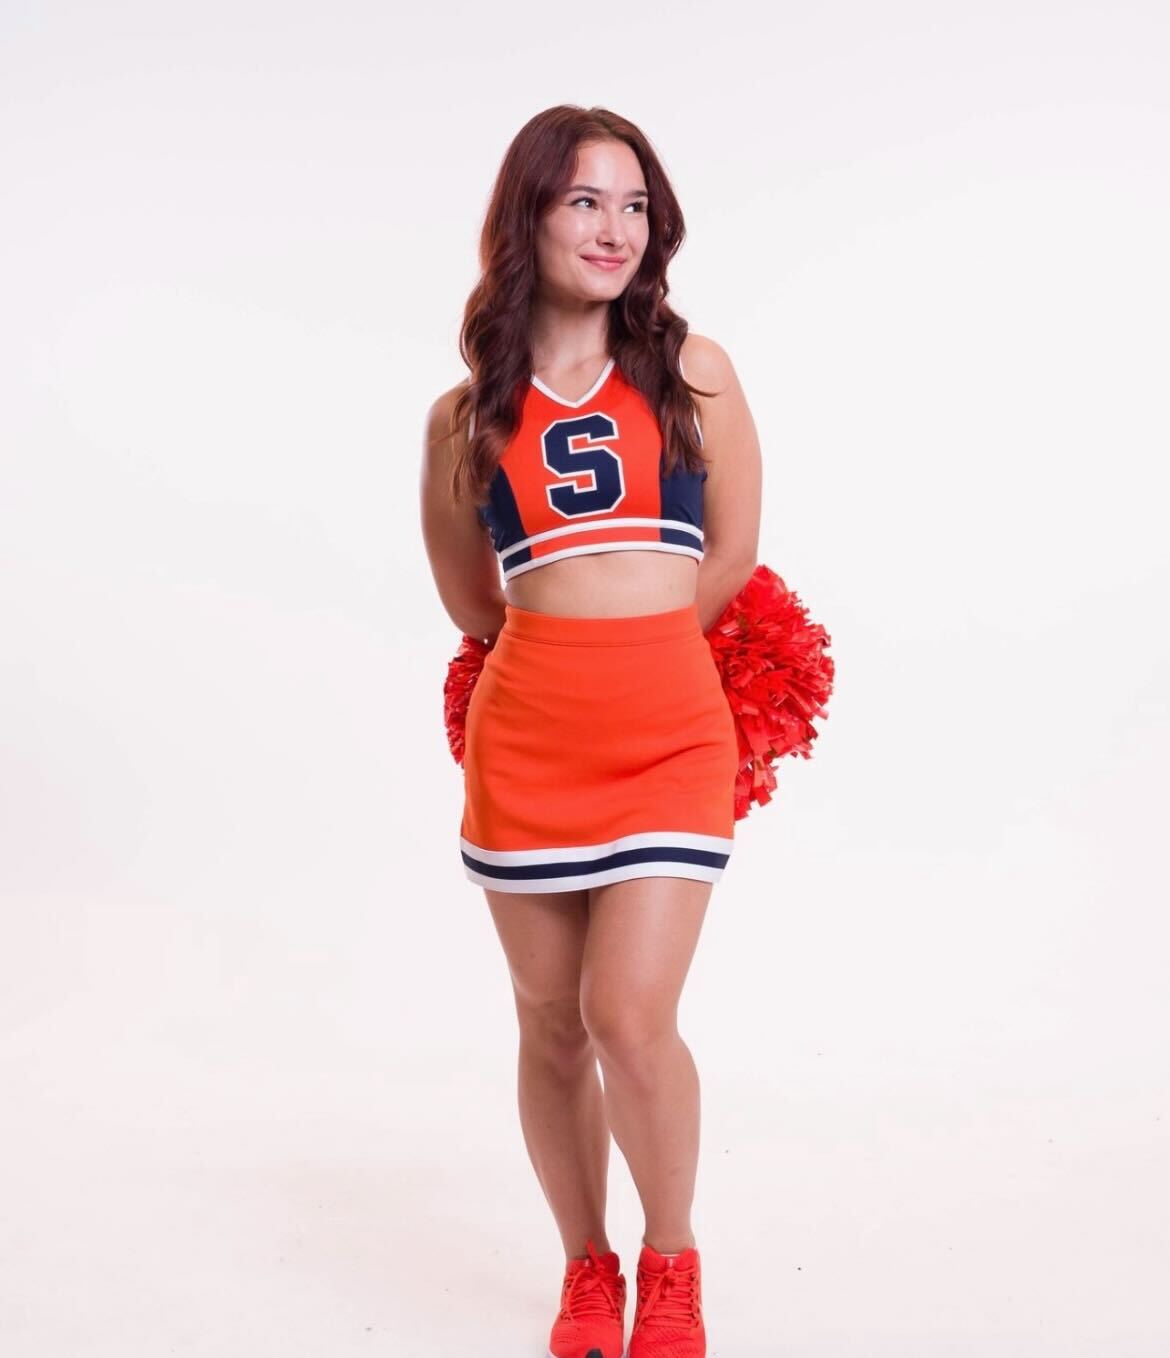 a person poses in a cheerleading uniform